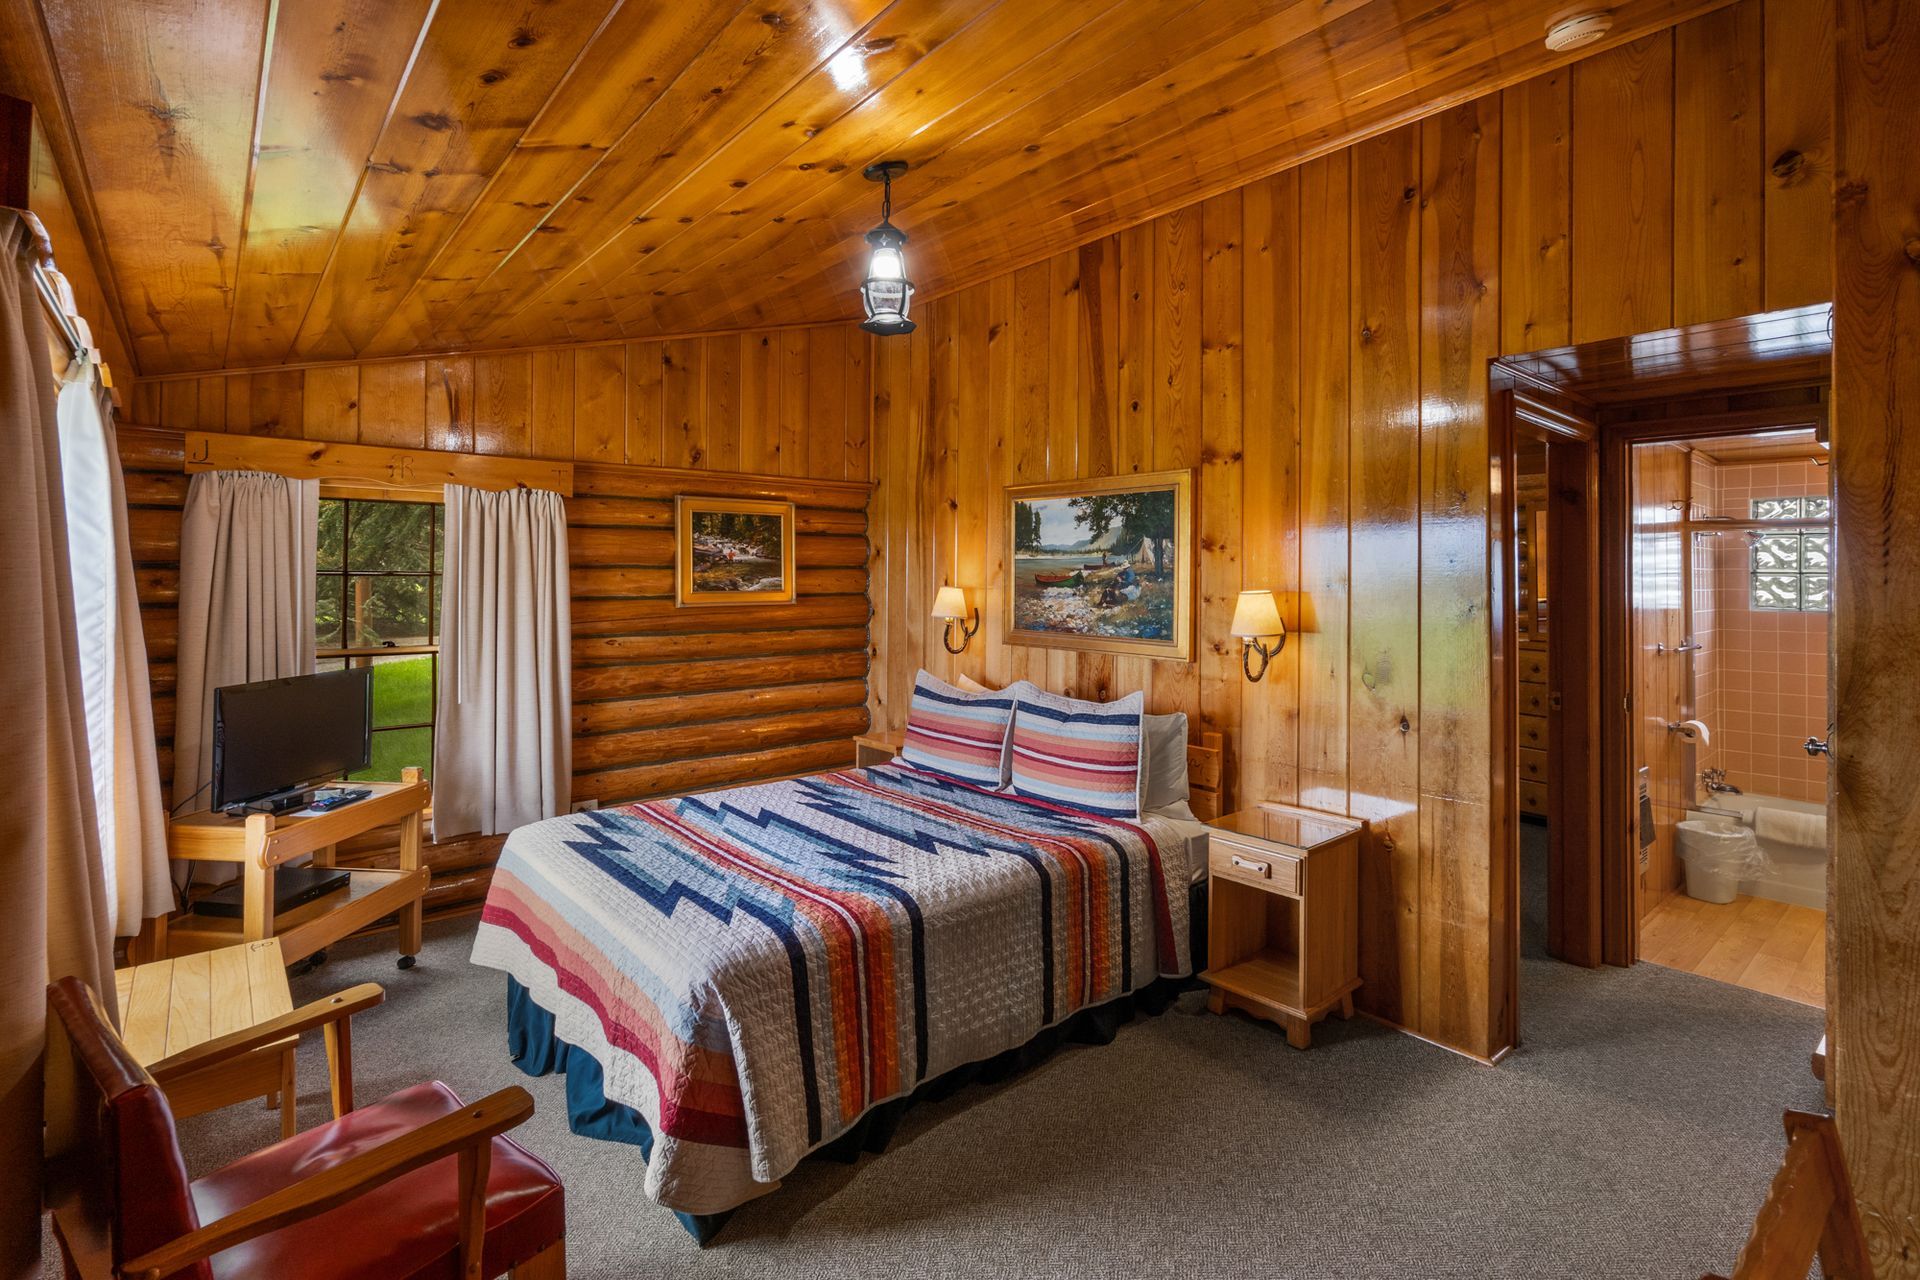 A bedroom in a log cabin with a bed , chair and television.